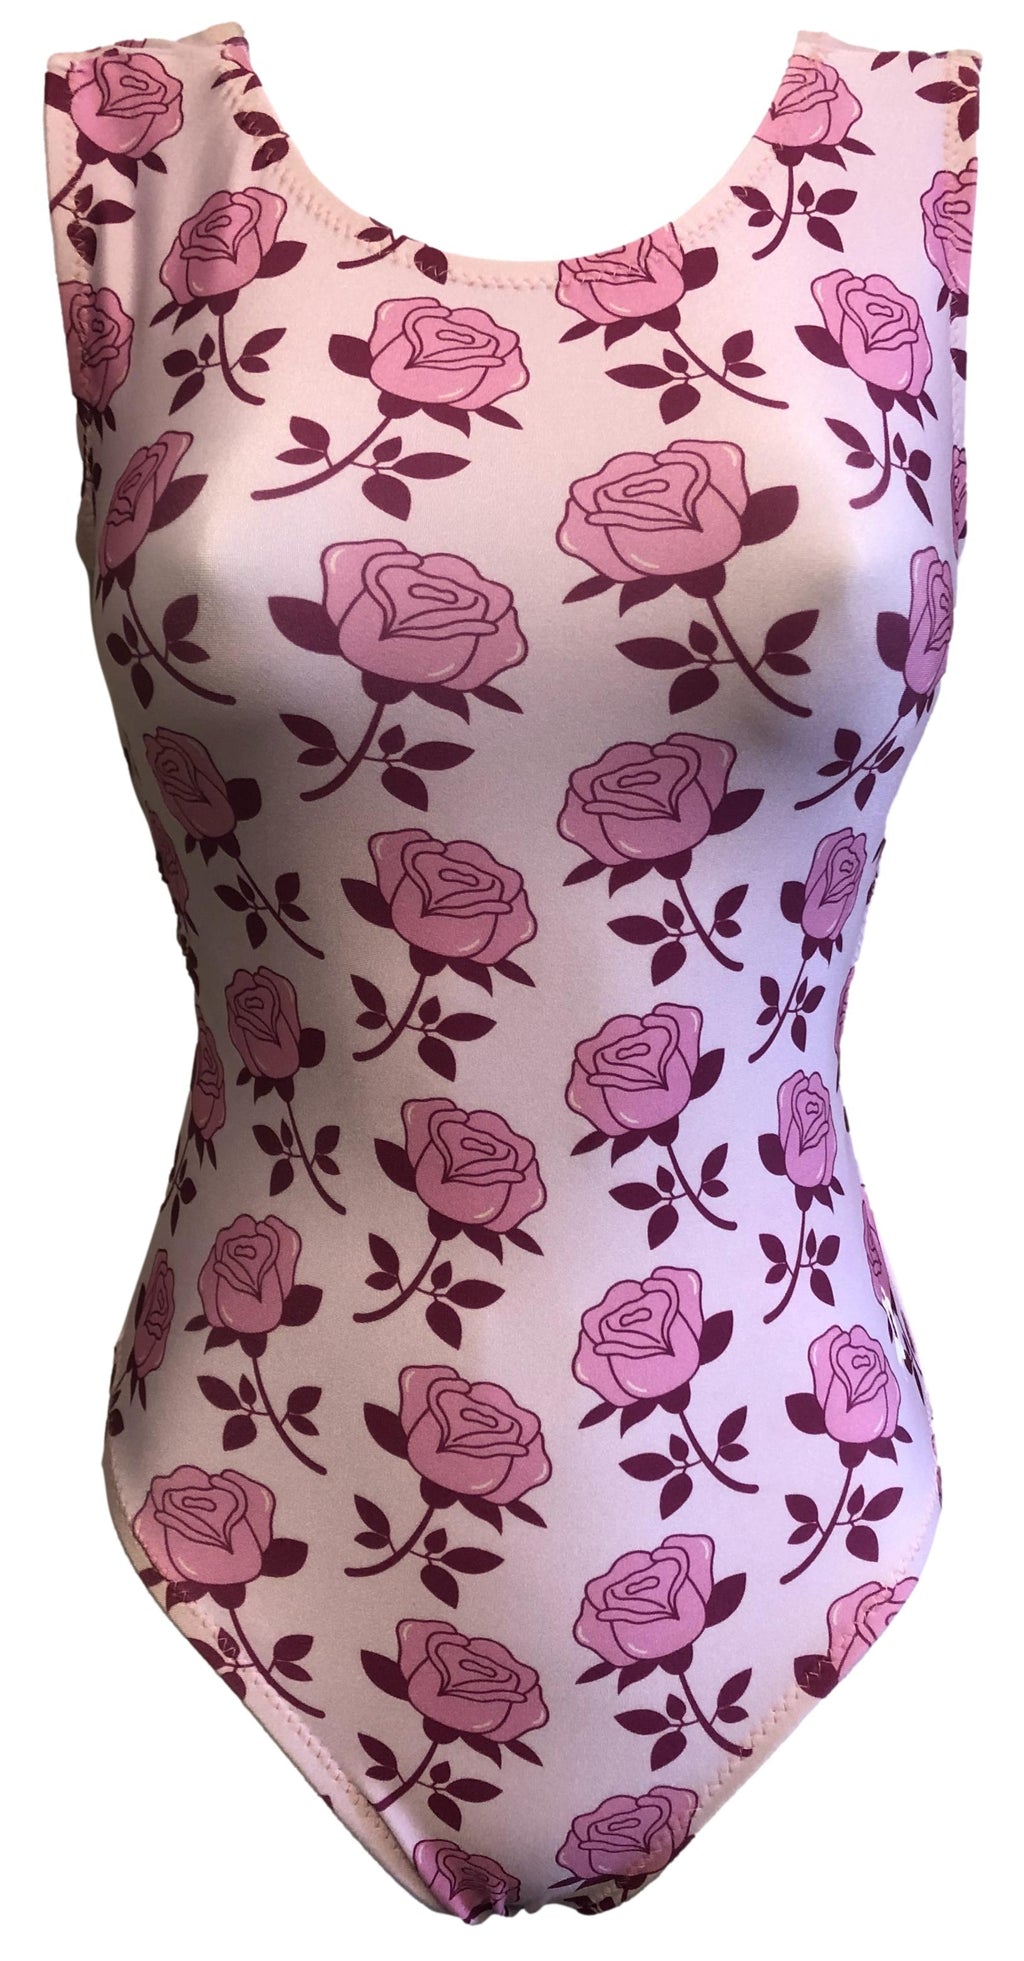 Bouquet of Roses leotard for girls